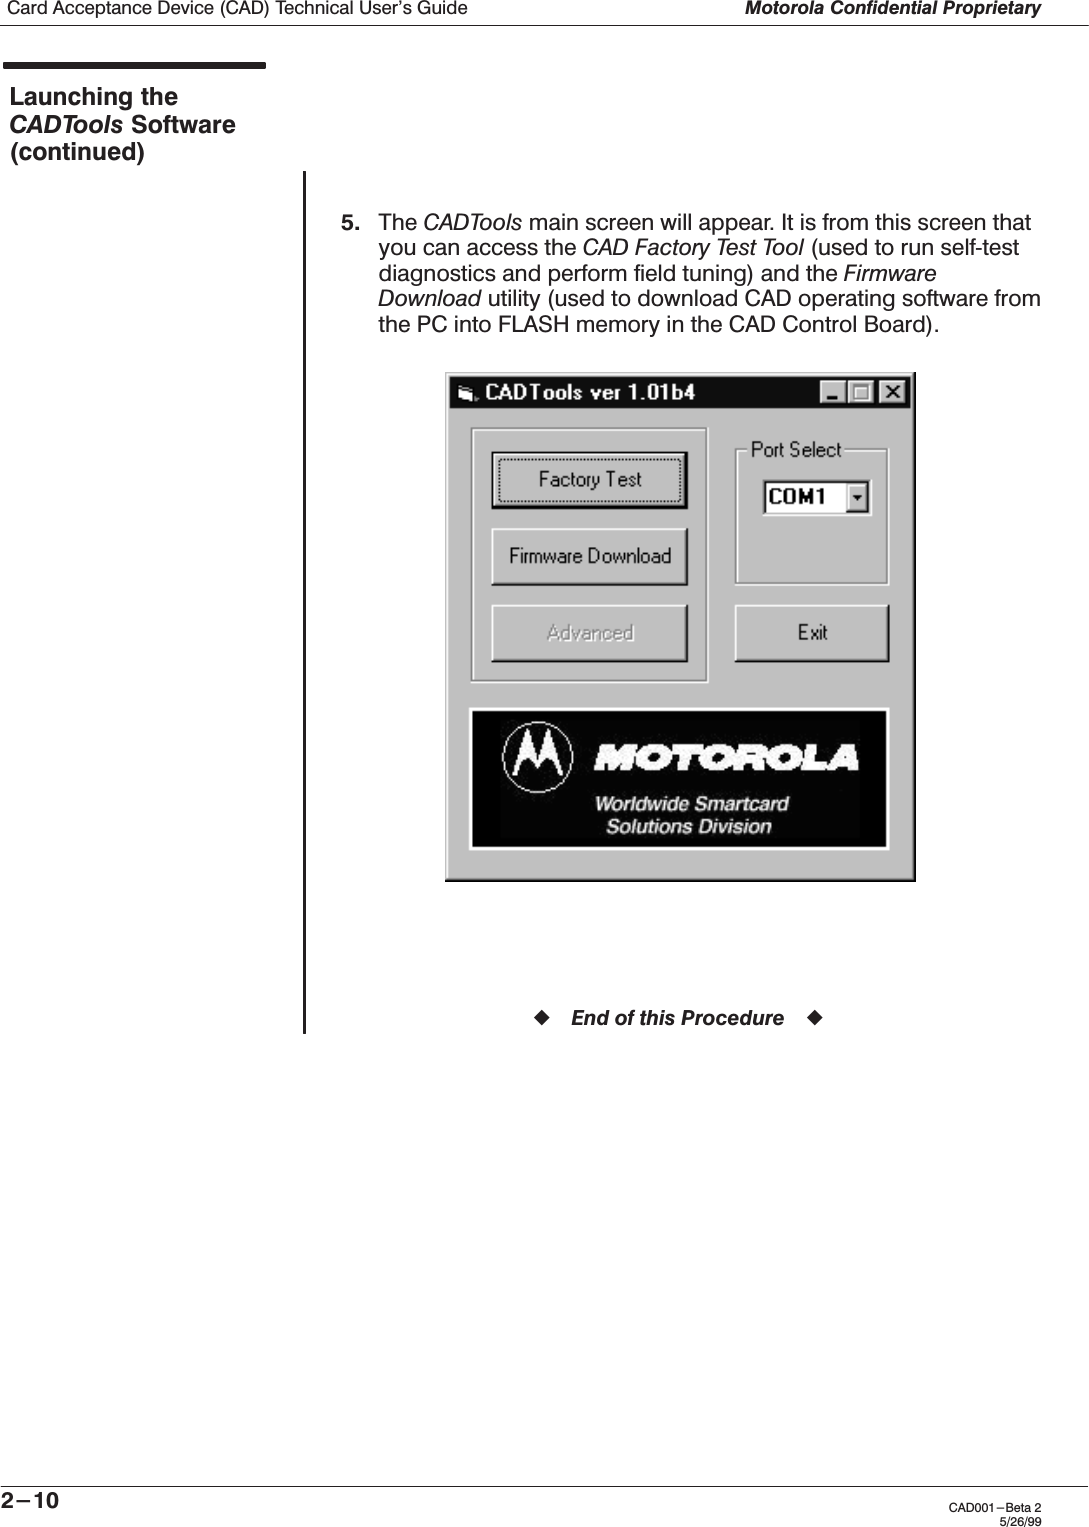 Card Acceptance Device (CAD) Technical User&apos;s Guide Motorola Confidential Proprietary2-10 CAD001-Beta 25/26/99Launching theCADTools Software(continued)5. The CADTools main screen will appear. It is from this screen thatyou can access the CAD Factory Test Tool (used to run selfĆtestdiagnostics and perform field tuning) and the FirmwareDownload utility (used to download CAD operating software fromthe PC into FLASH memory in the CAD Control Board).ząEnd of this Procedureąz